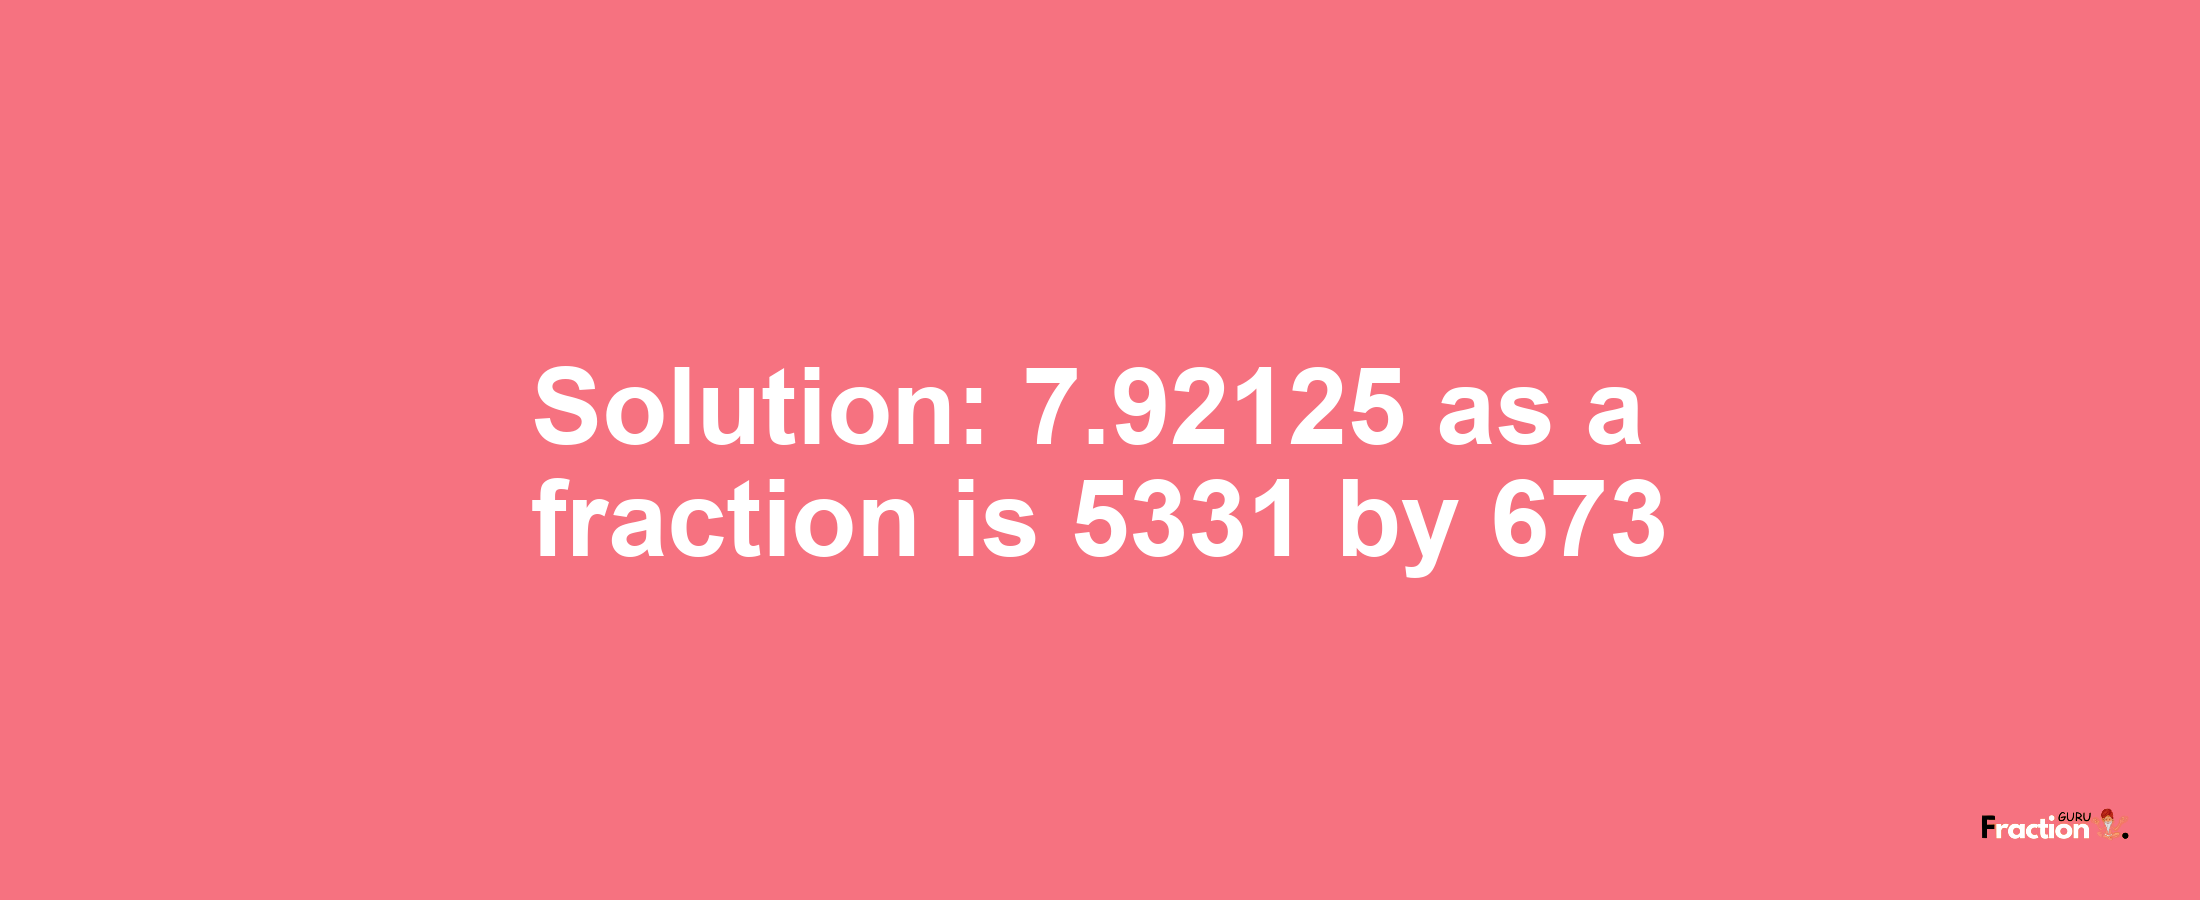 Solution:7.92125 as a fraction is 5331/673